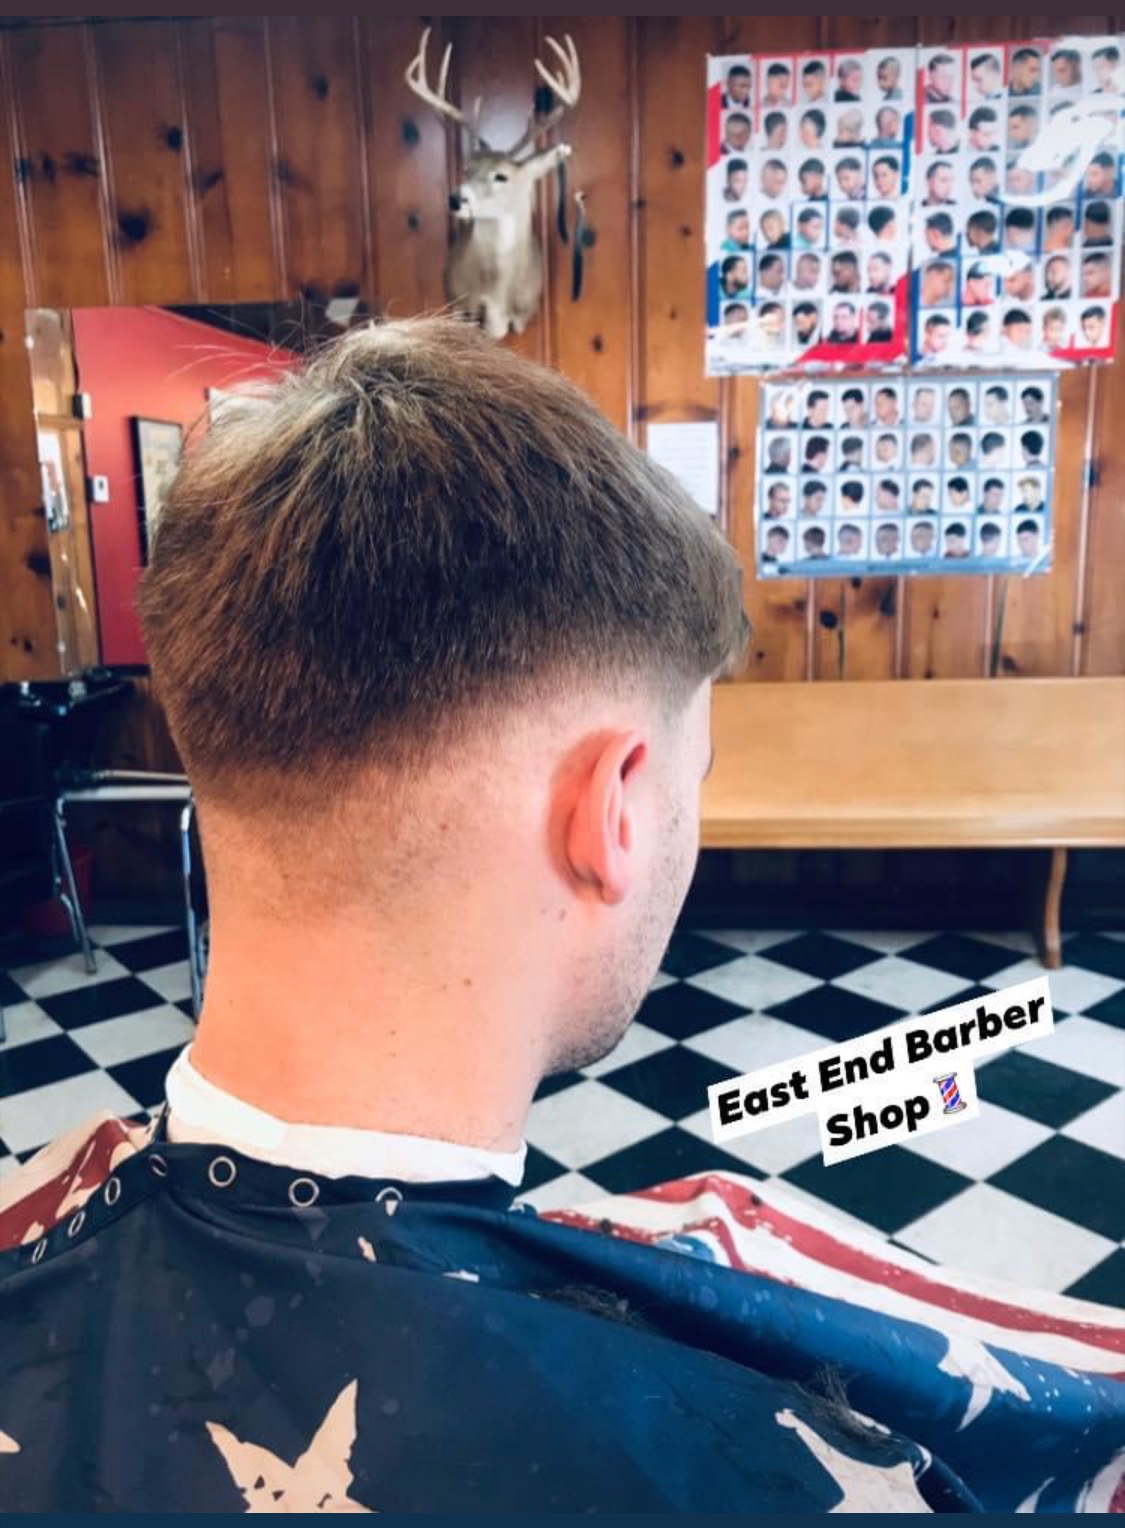 East End Barber Shop 1123 Church St, Tiptonville Tennessee 38079